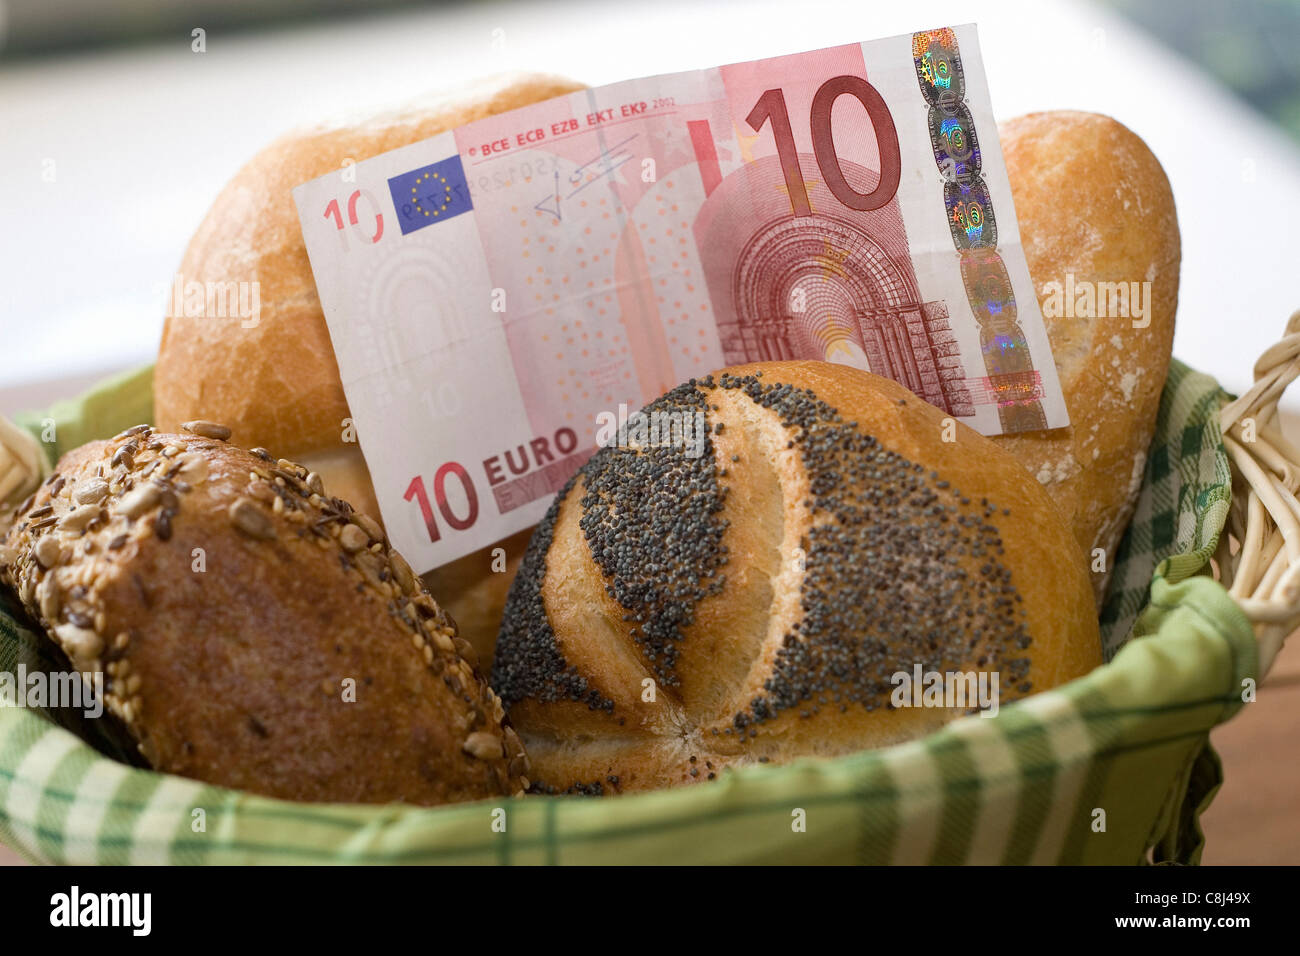 Food, bread rolls, bun, Waking up, Buns, money, bank note, bill, pay, pay, costs, expenses, price, price increase, mark up, infl Stock Photo